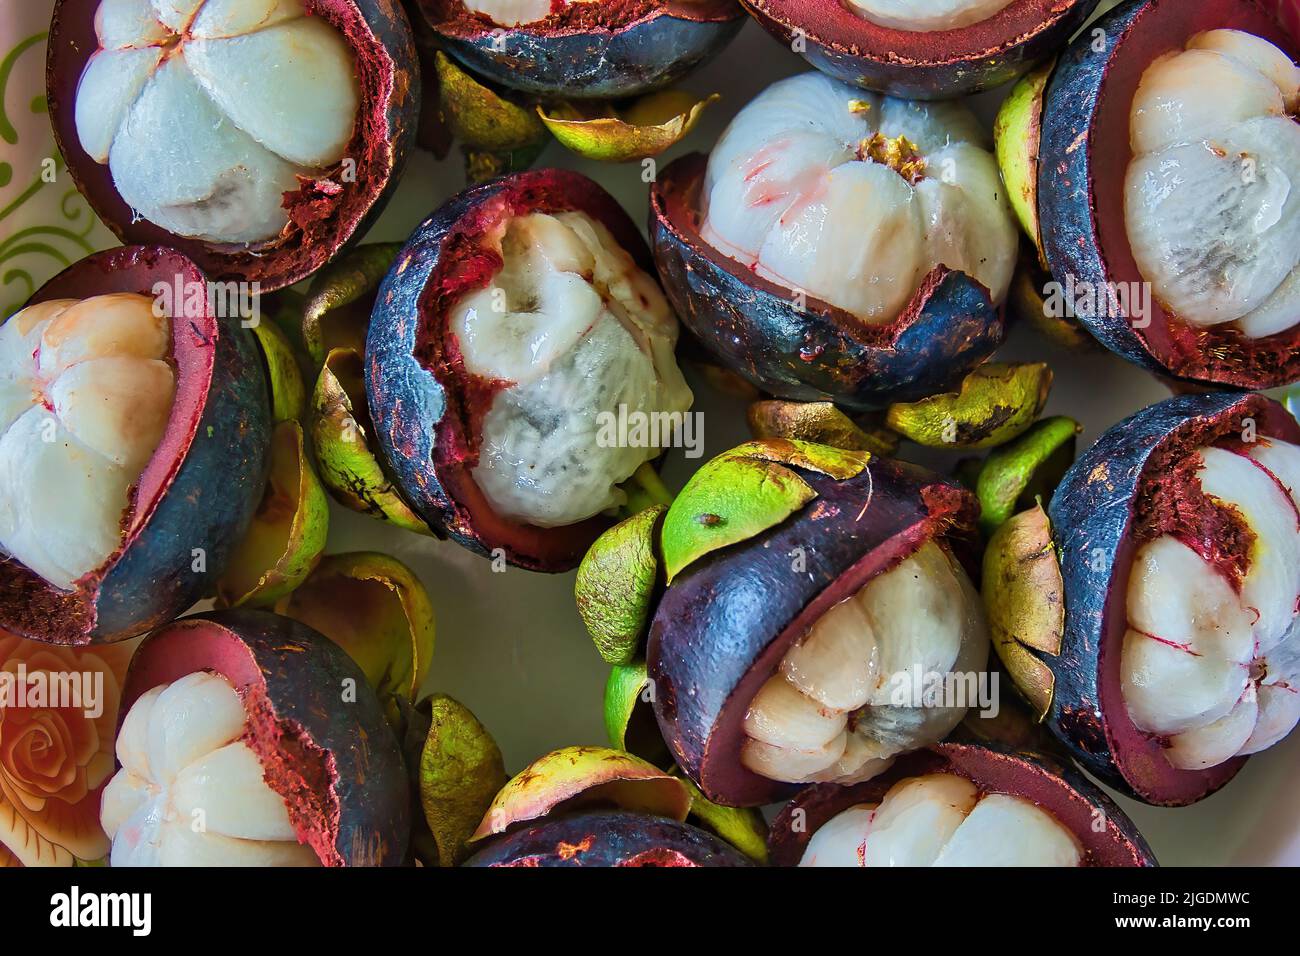 Closeup of tropical mangosteen fruits and cross section of purple skin and white seeds Stock Photo